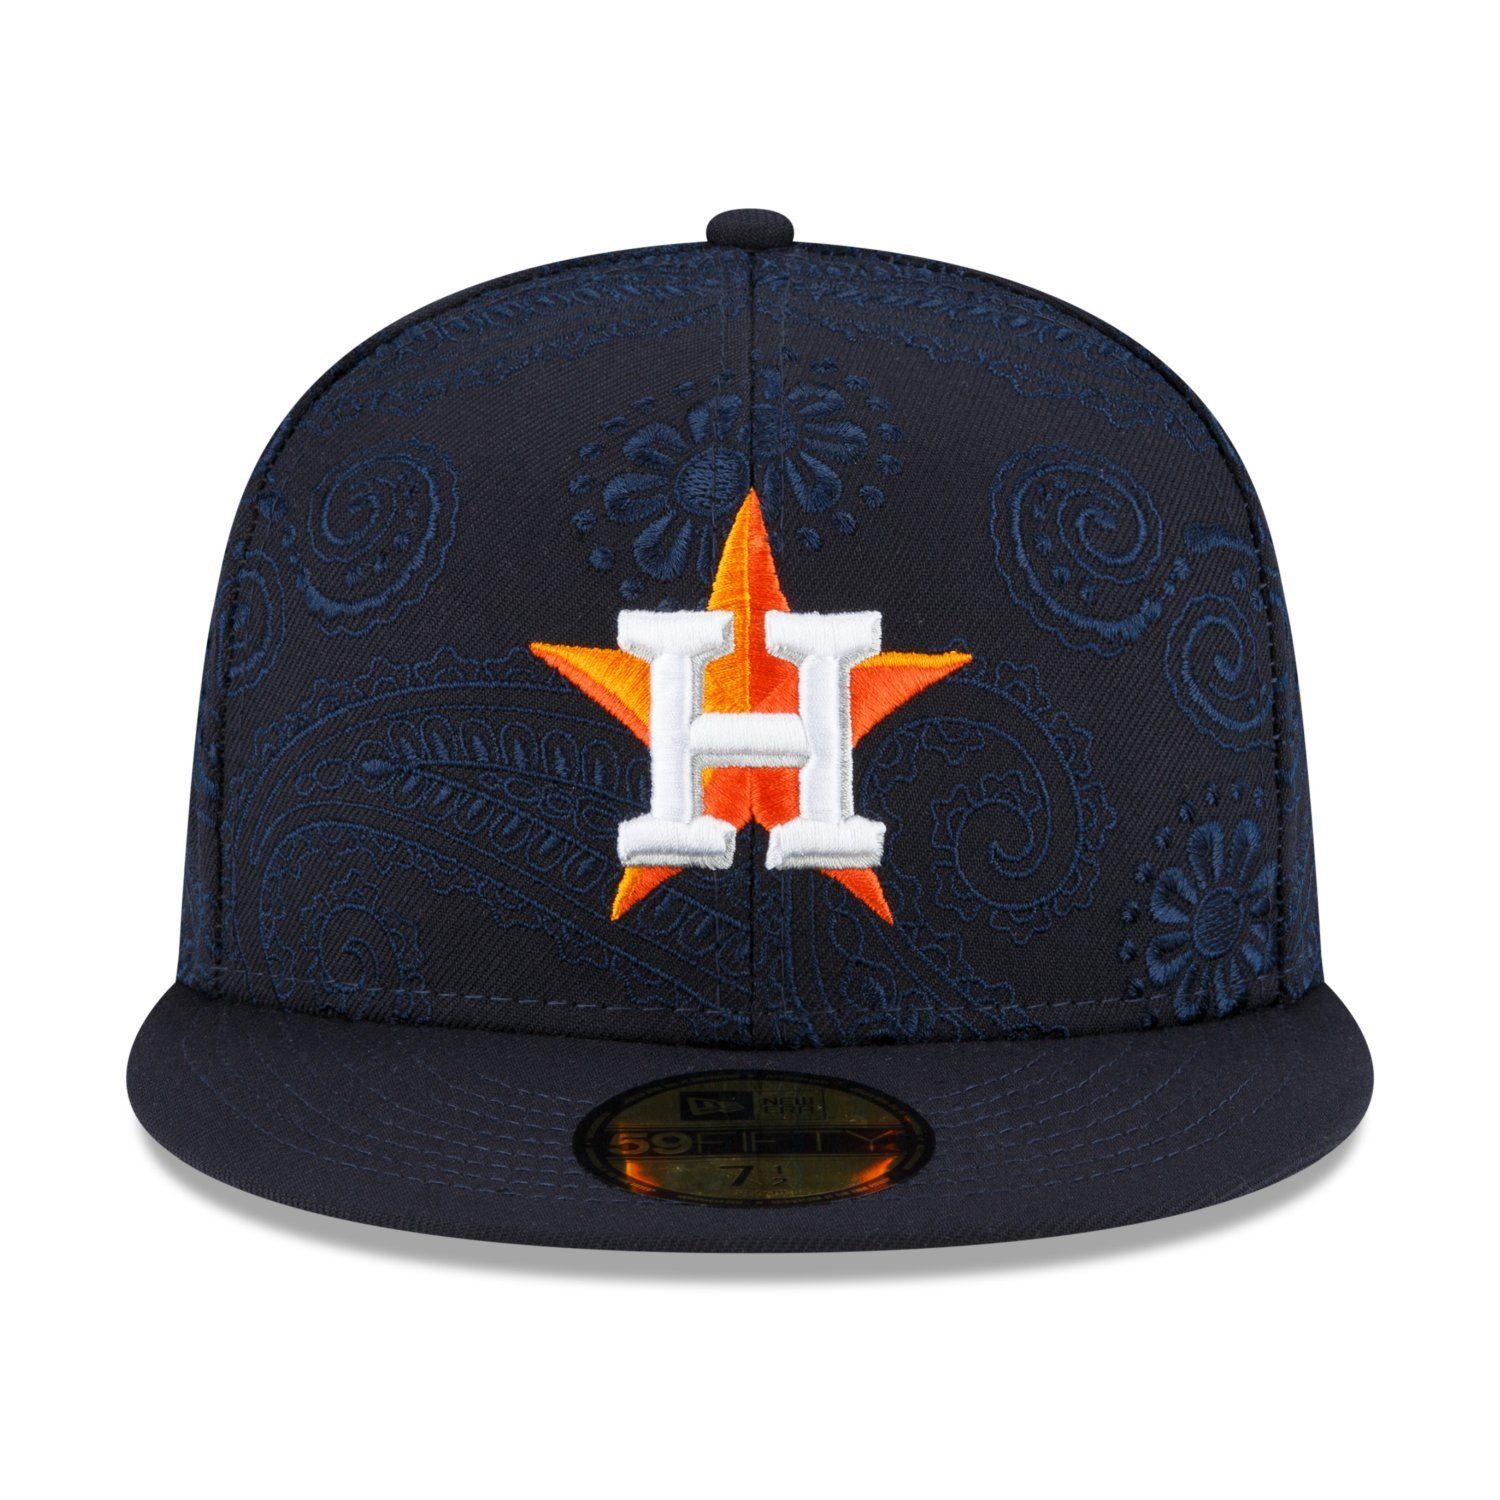 New Era Fitted Cap 59Fifty PAISLEY SWIRL Astros Houston